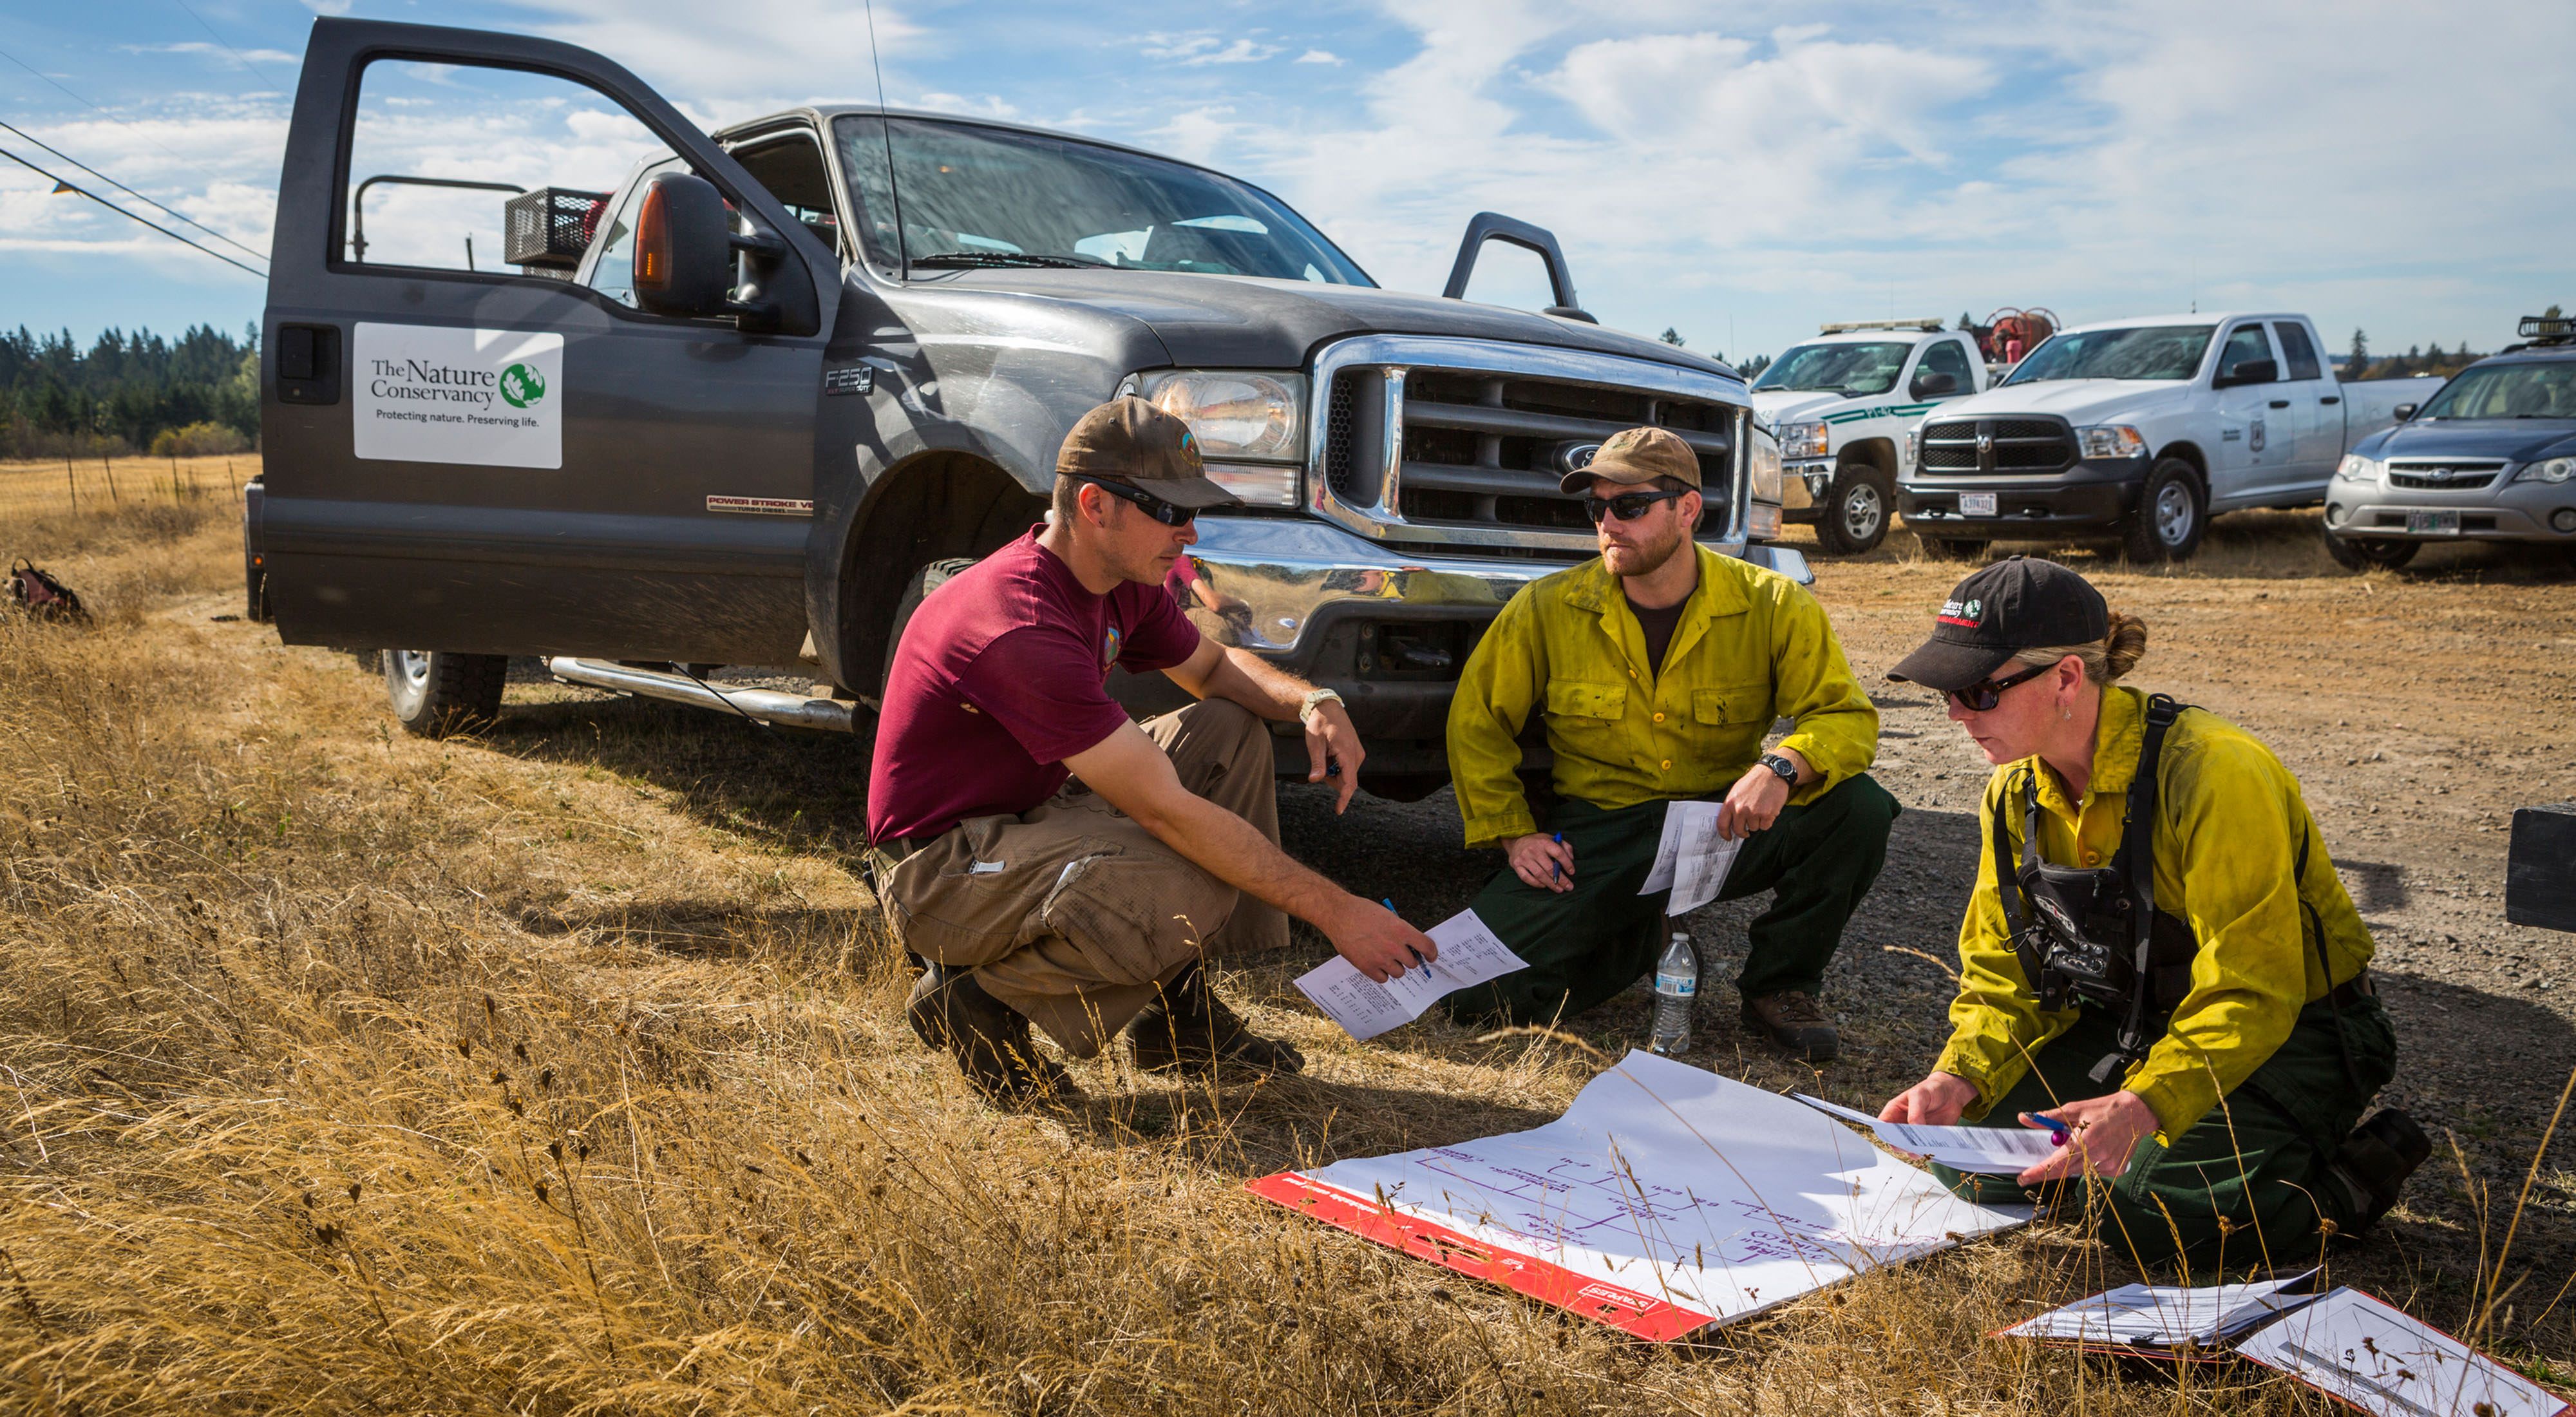 September 2015. Jeff Crandall (left) and Oregon Fire Manager (far right) plan the day's controlled burn in Kingston Preserve in Oregon.